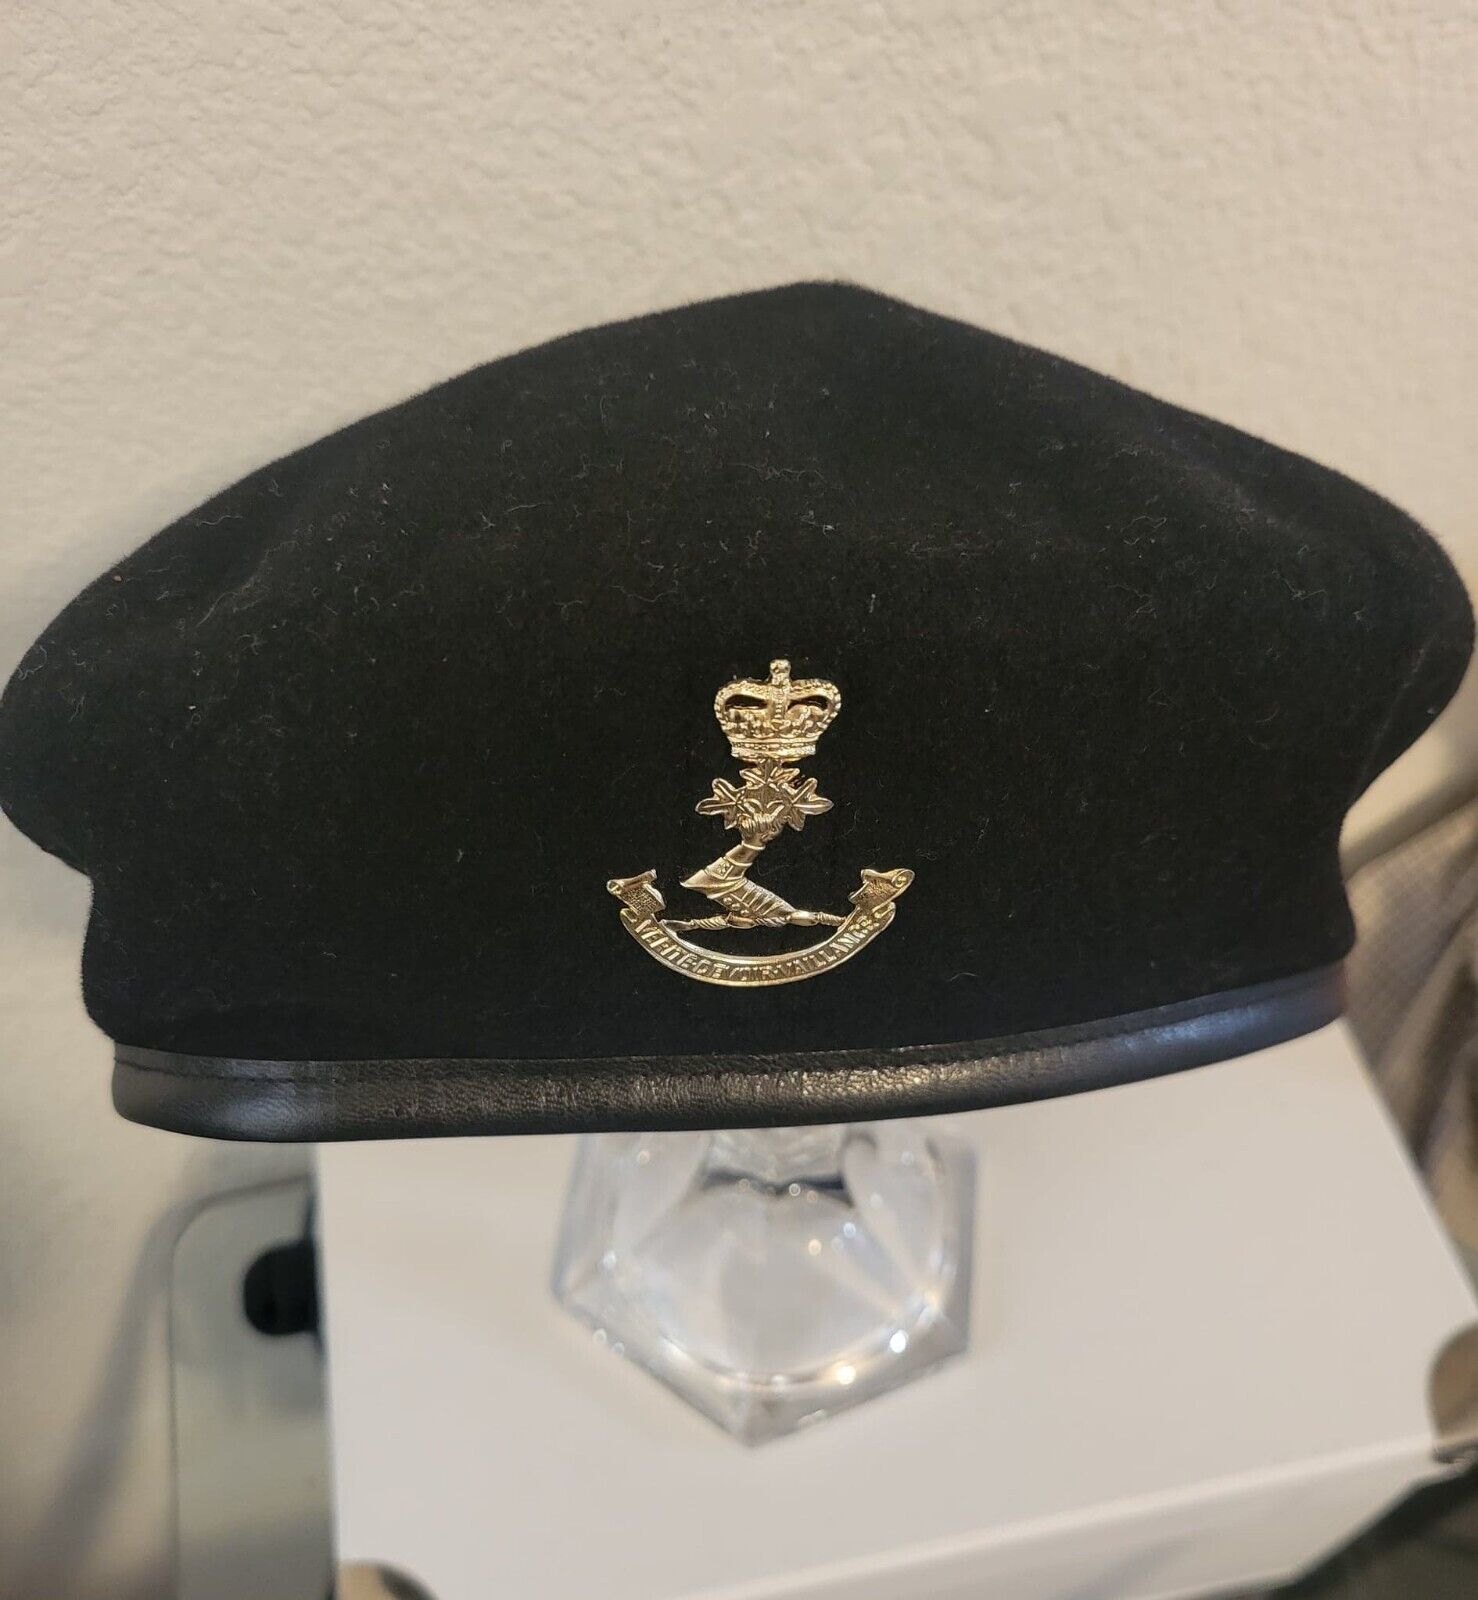 Canada: Royal Military College Cap Size 71/2